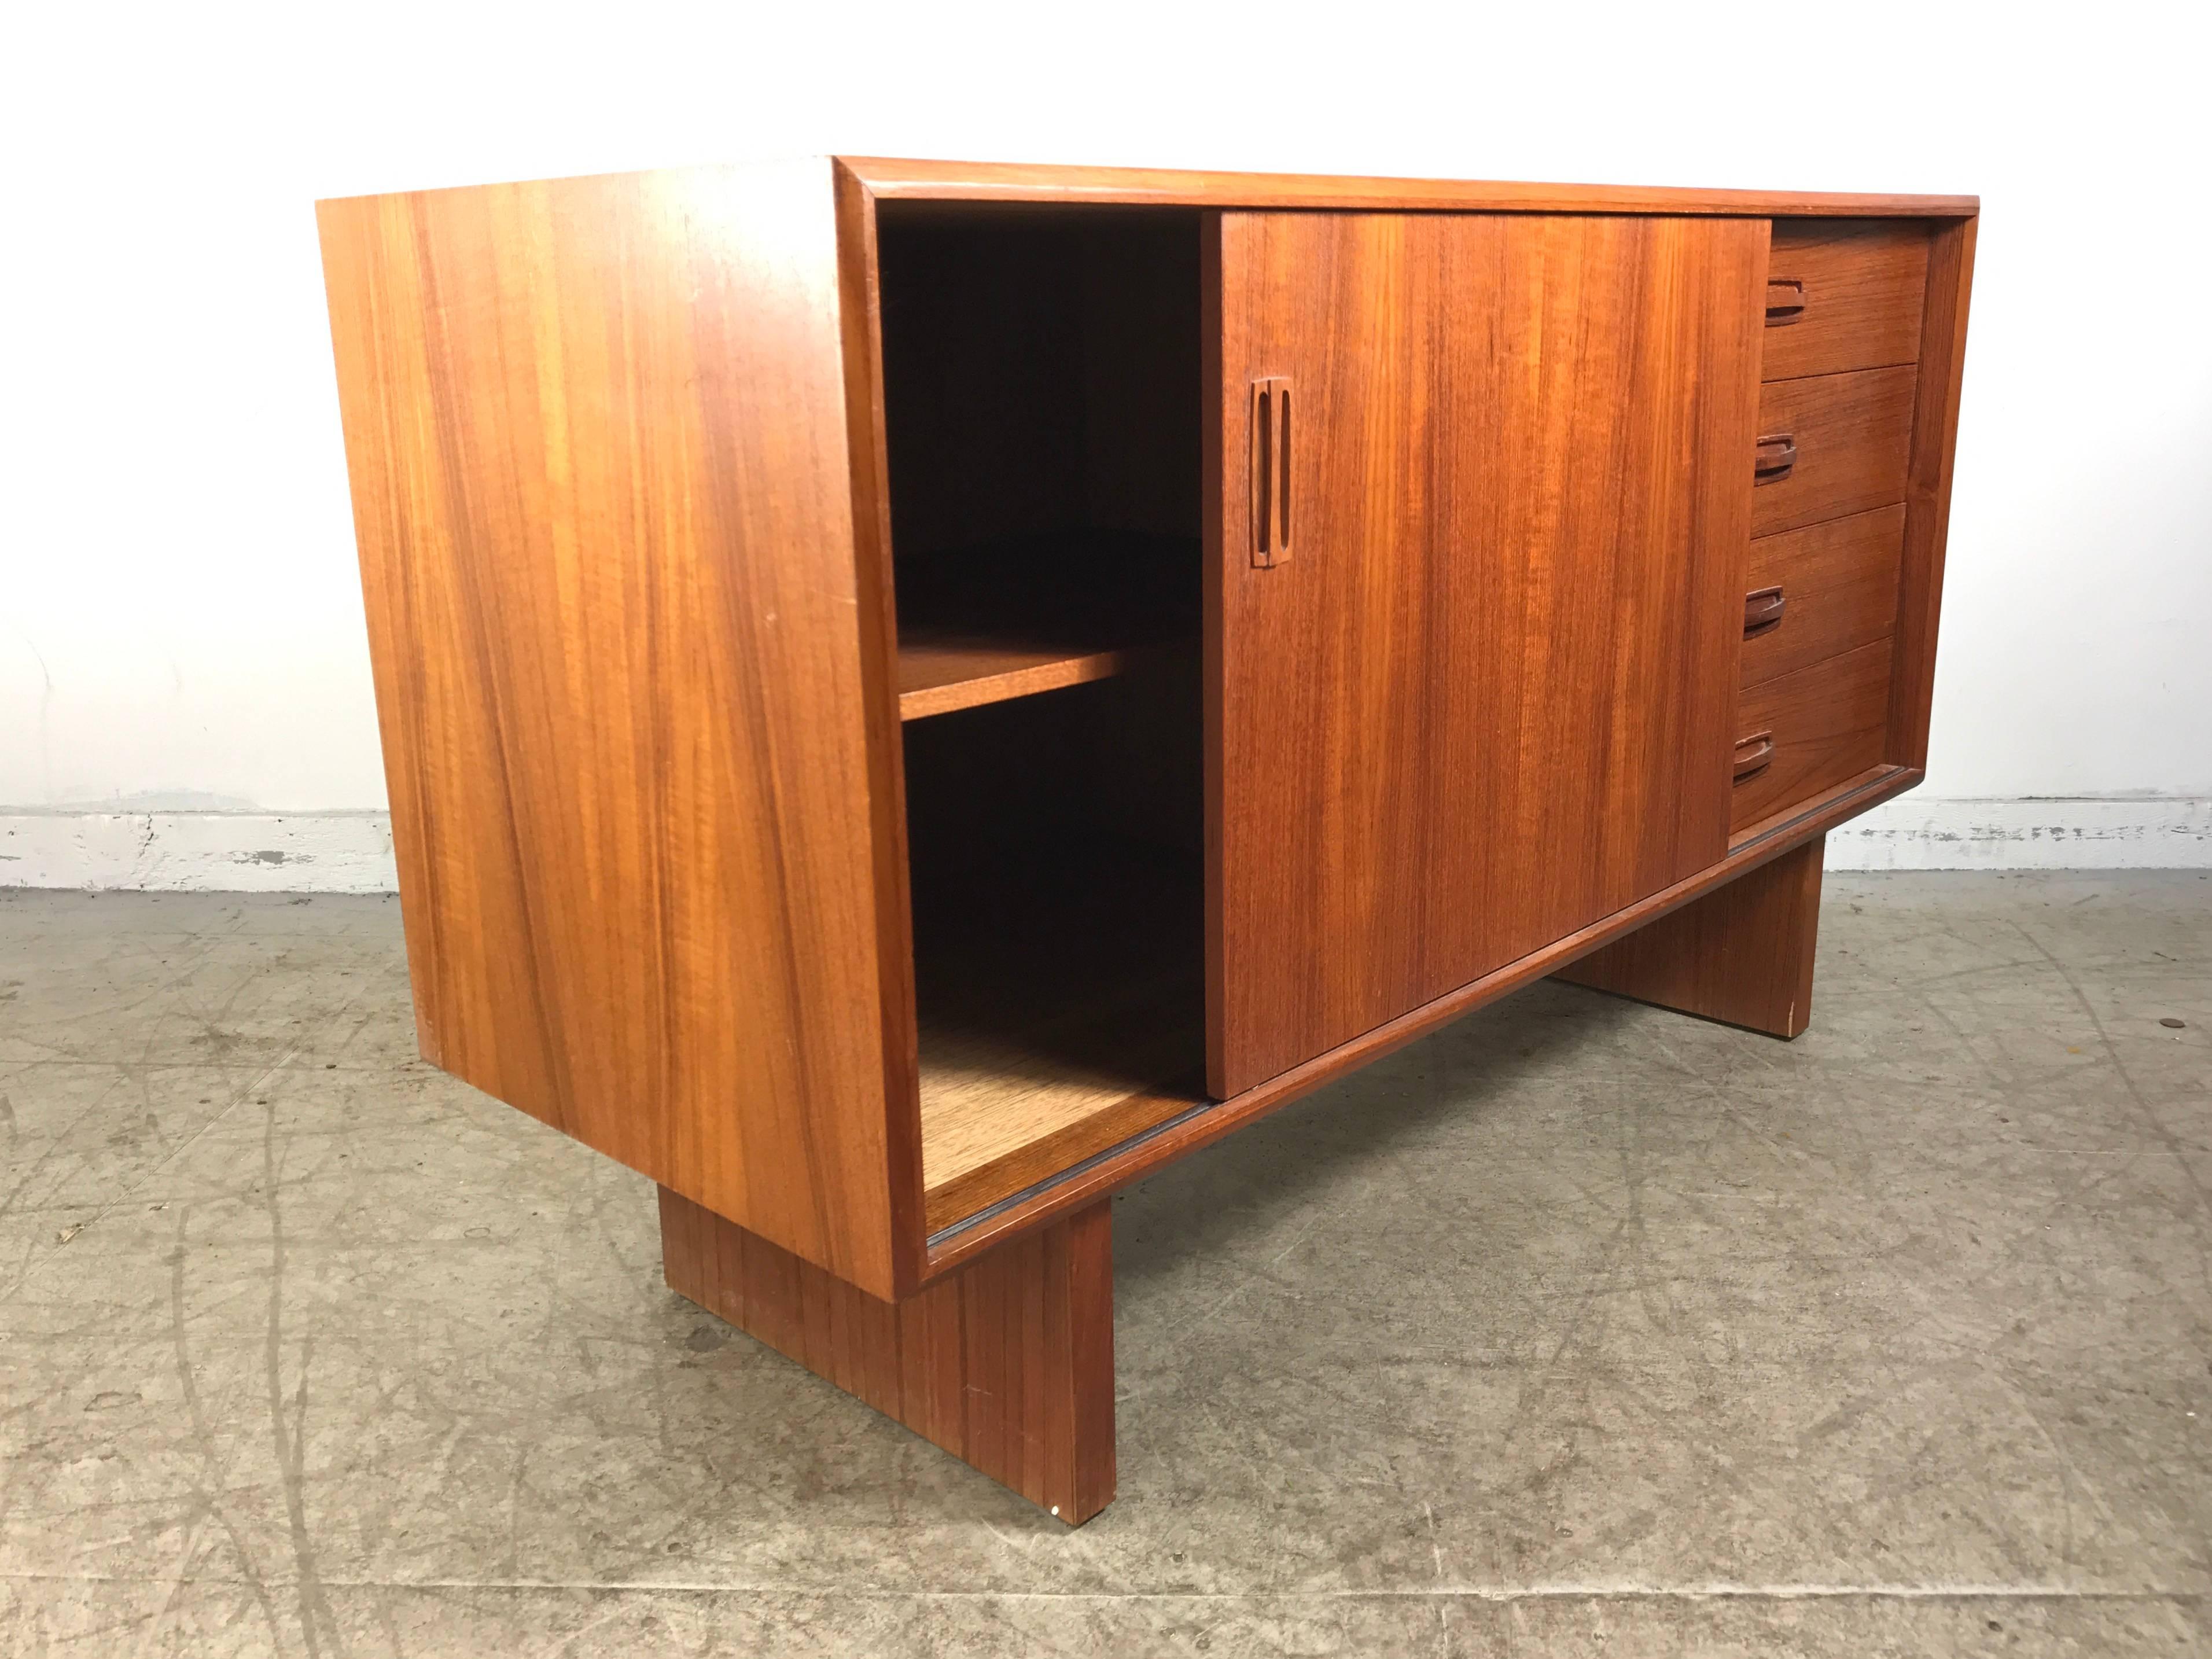 Classic Danish modernist 4' teak credenza, server in the manner of Arne Vodder. Wonderful, warm teak wood construction, cabinet features four drawers to right side, sliding door with one shelf, sleek, simple design with stunning drawer and door